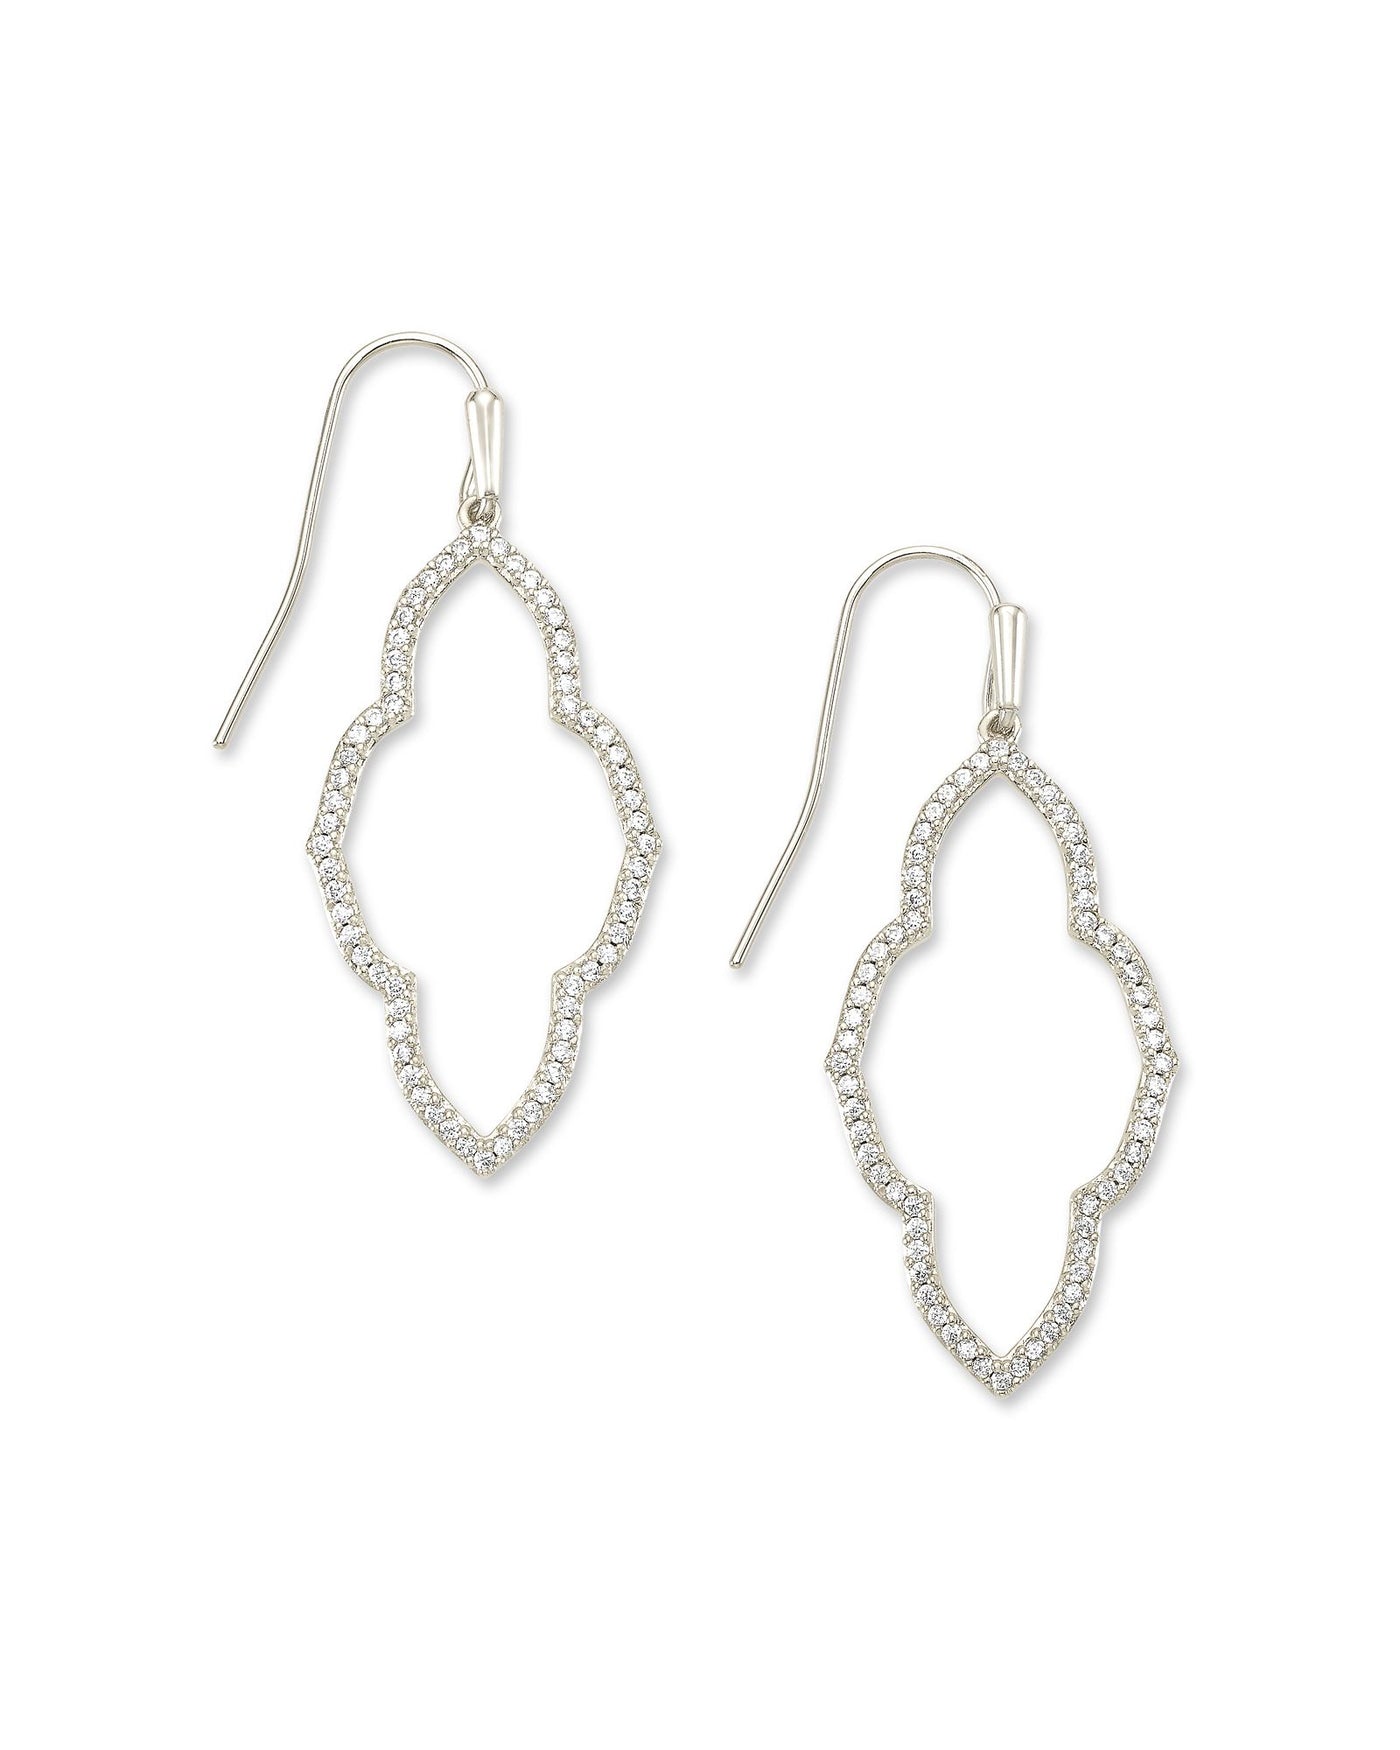 Kendra Scott Abbie Silver Small Open Frame Earrings in White Crystal-Earrings-Kendra Scott-Market Street Nest, Fashionable Clothing, Shoes and Home Décor Located in Mabank, TX